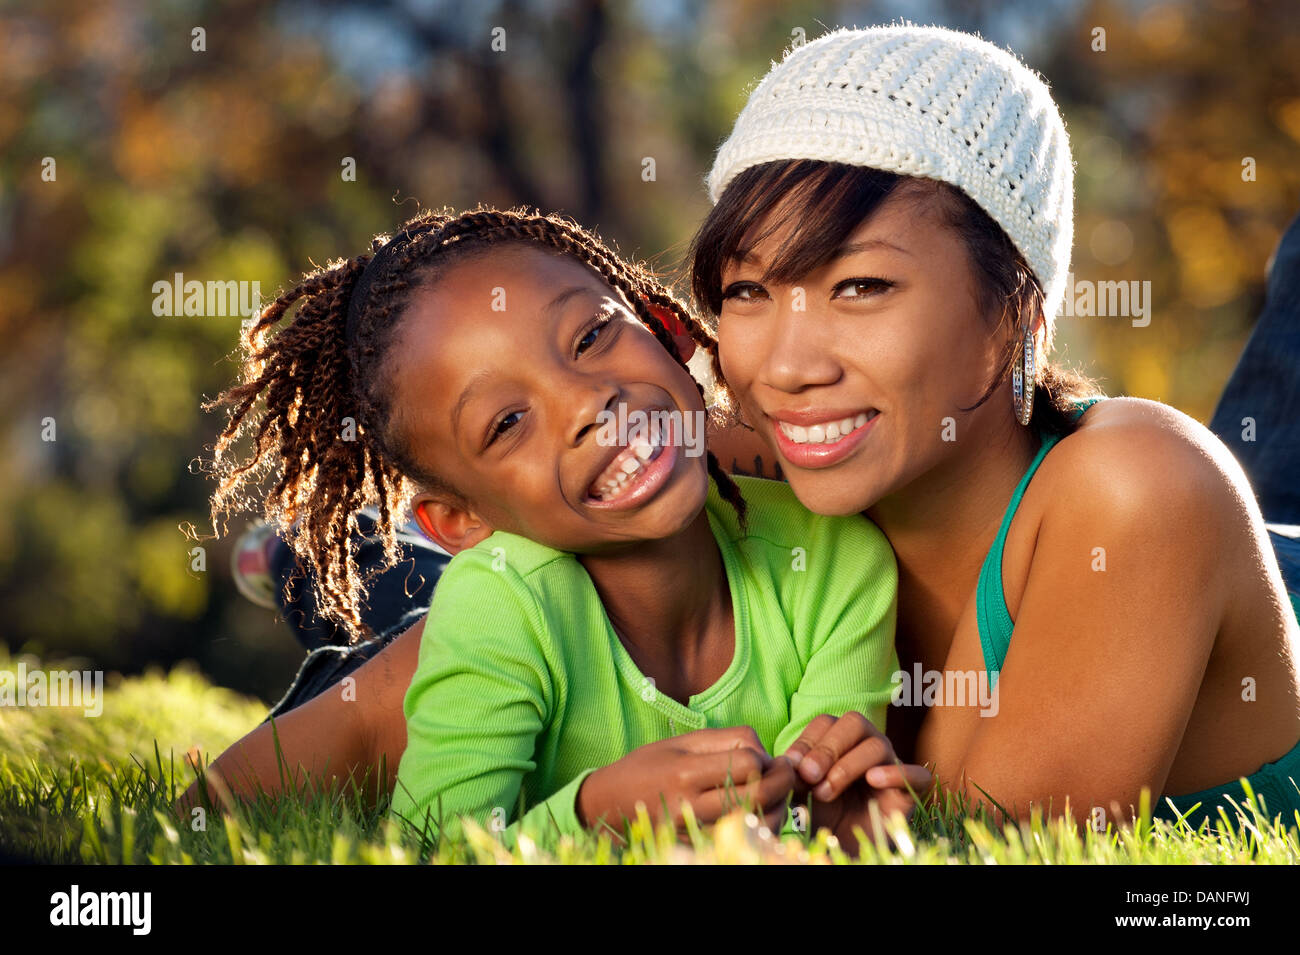 African American mother and child having fun Stock Photo